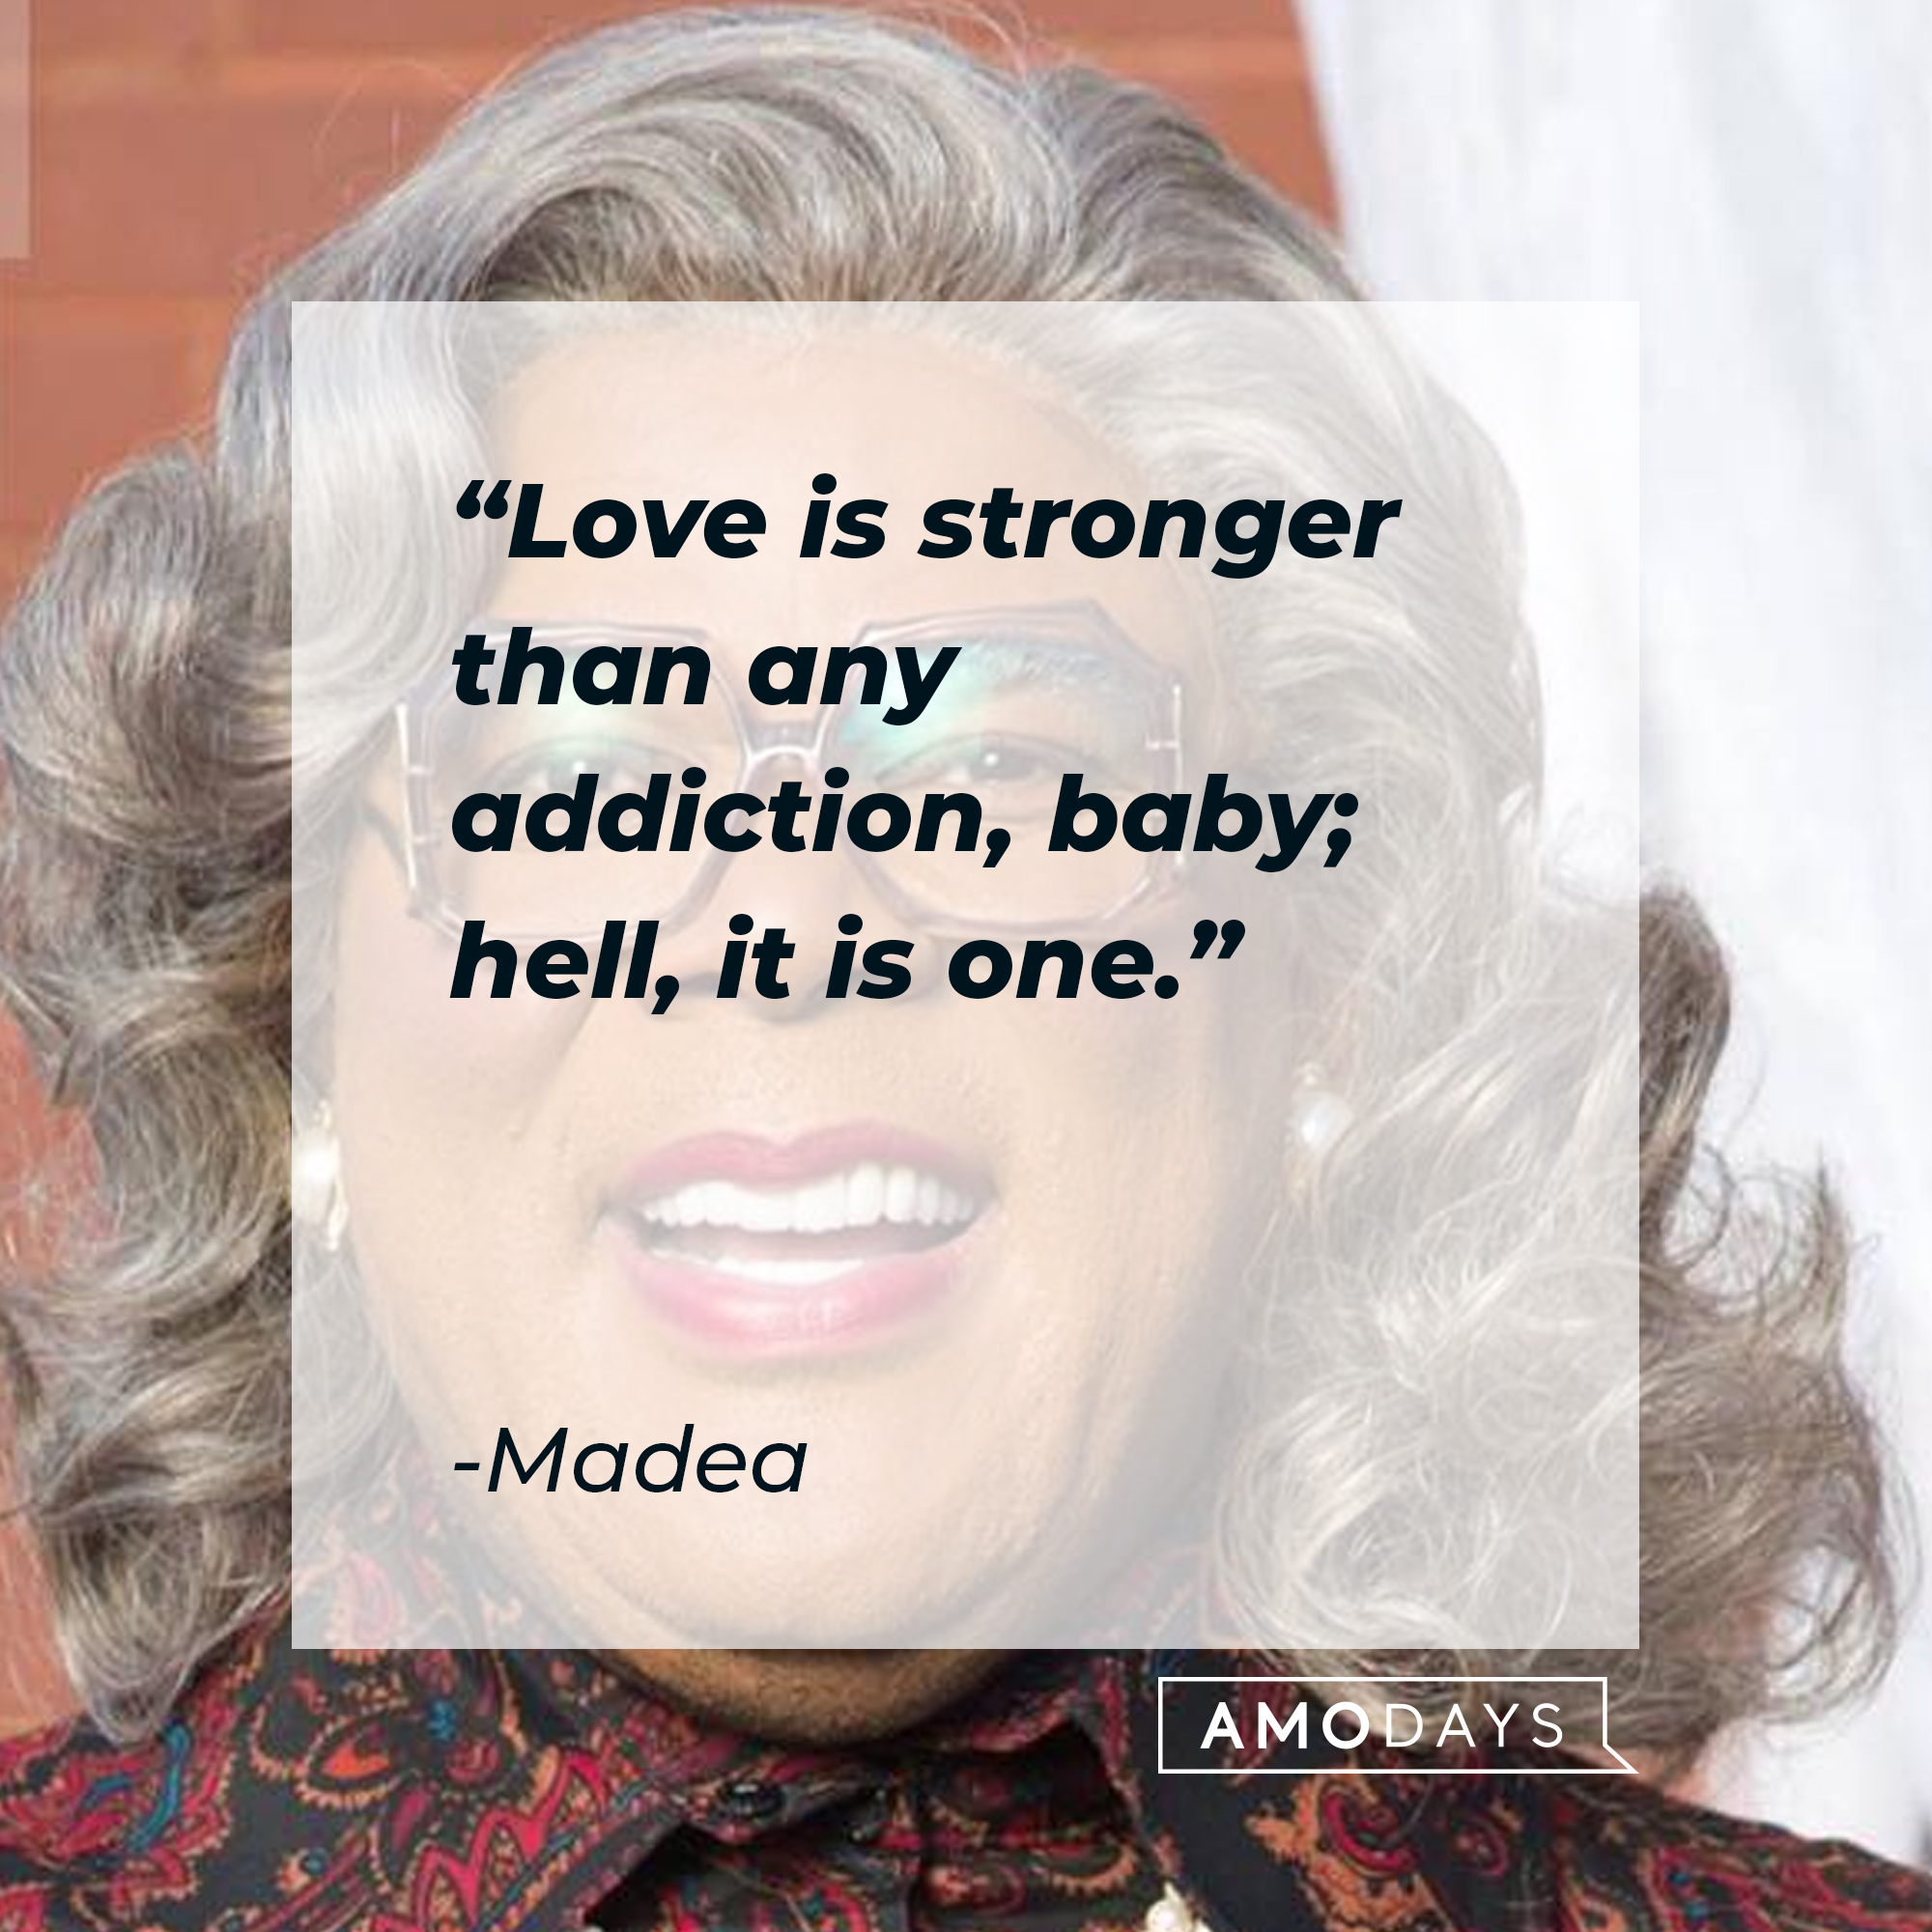 Madea's quote: "Love is stronger than any addiction, baby; hell, it is one." | Source: Facebook.com/madea